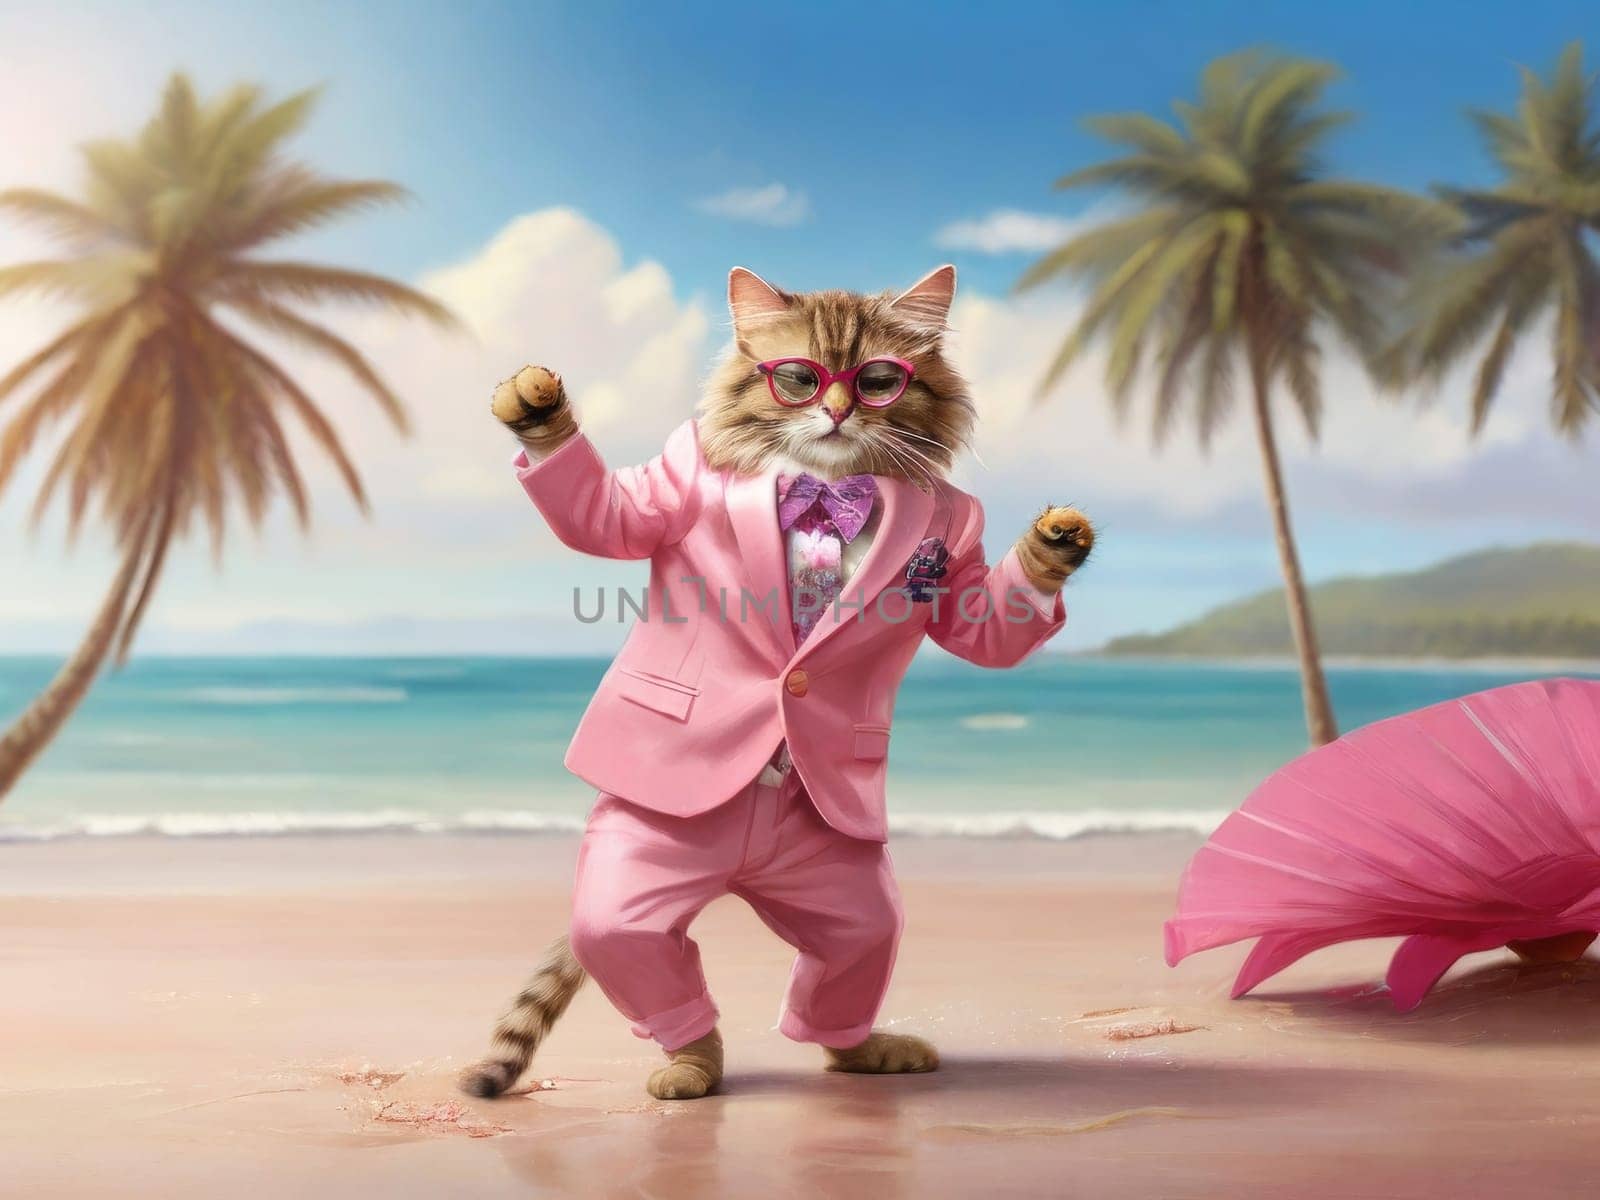 A glamorous cat in a pink suit, hat and sunglasses dances on the beach by the sea. illustration with cartoon cheerful cat on the beach by Ekaterina34